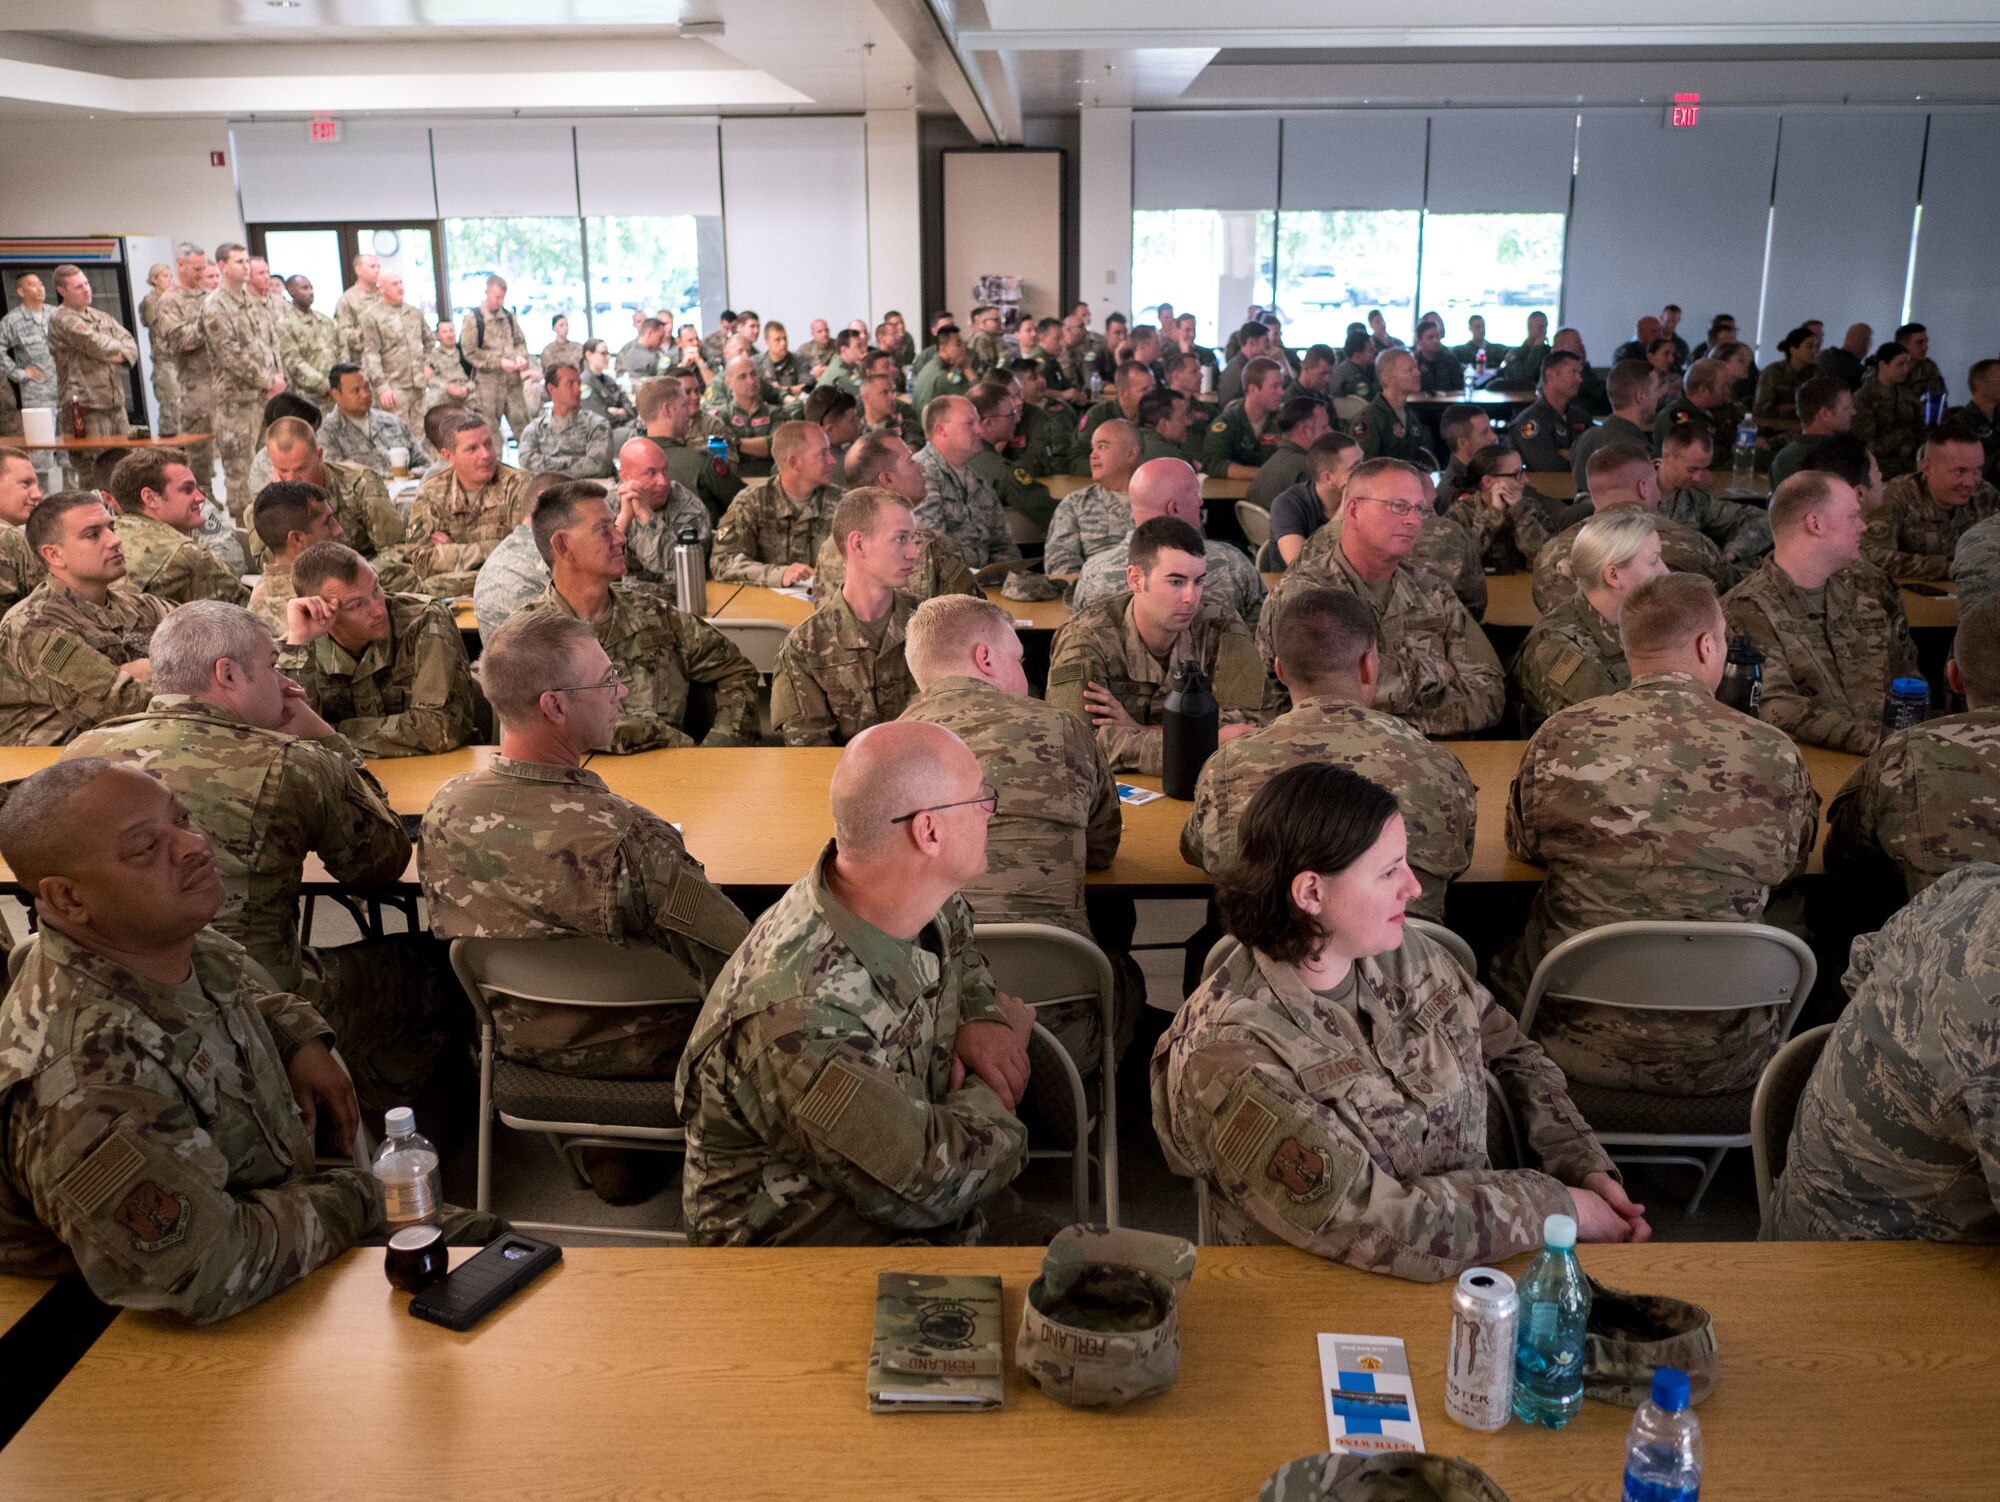 Participants of exercise Sentry Aloha 19-2 attend a welcome briefing Aug. 20, 2019, Joint Base Pearl Harbor-Hickam. The exercise entails back-to-back combat sorties with visiting aircraft from visiting air national guard units and the Royal Australian Air Force.